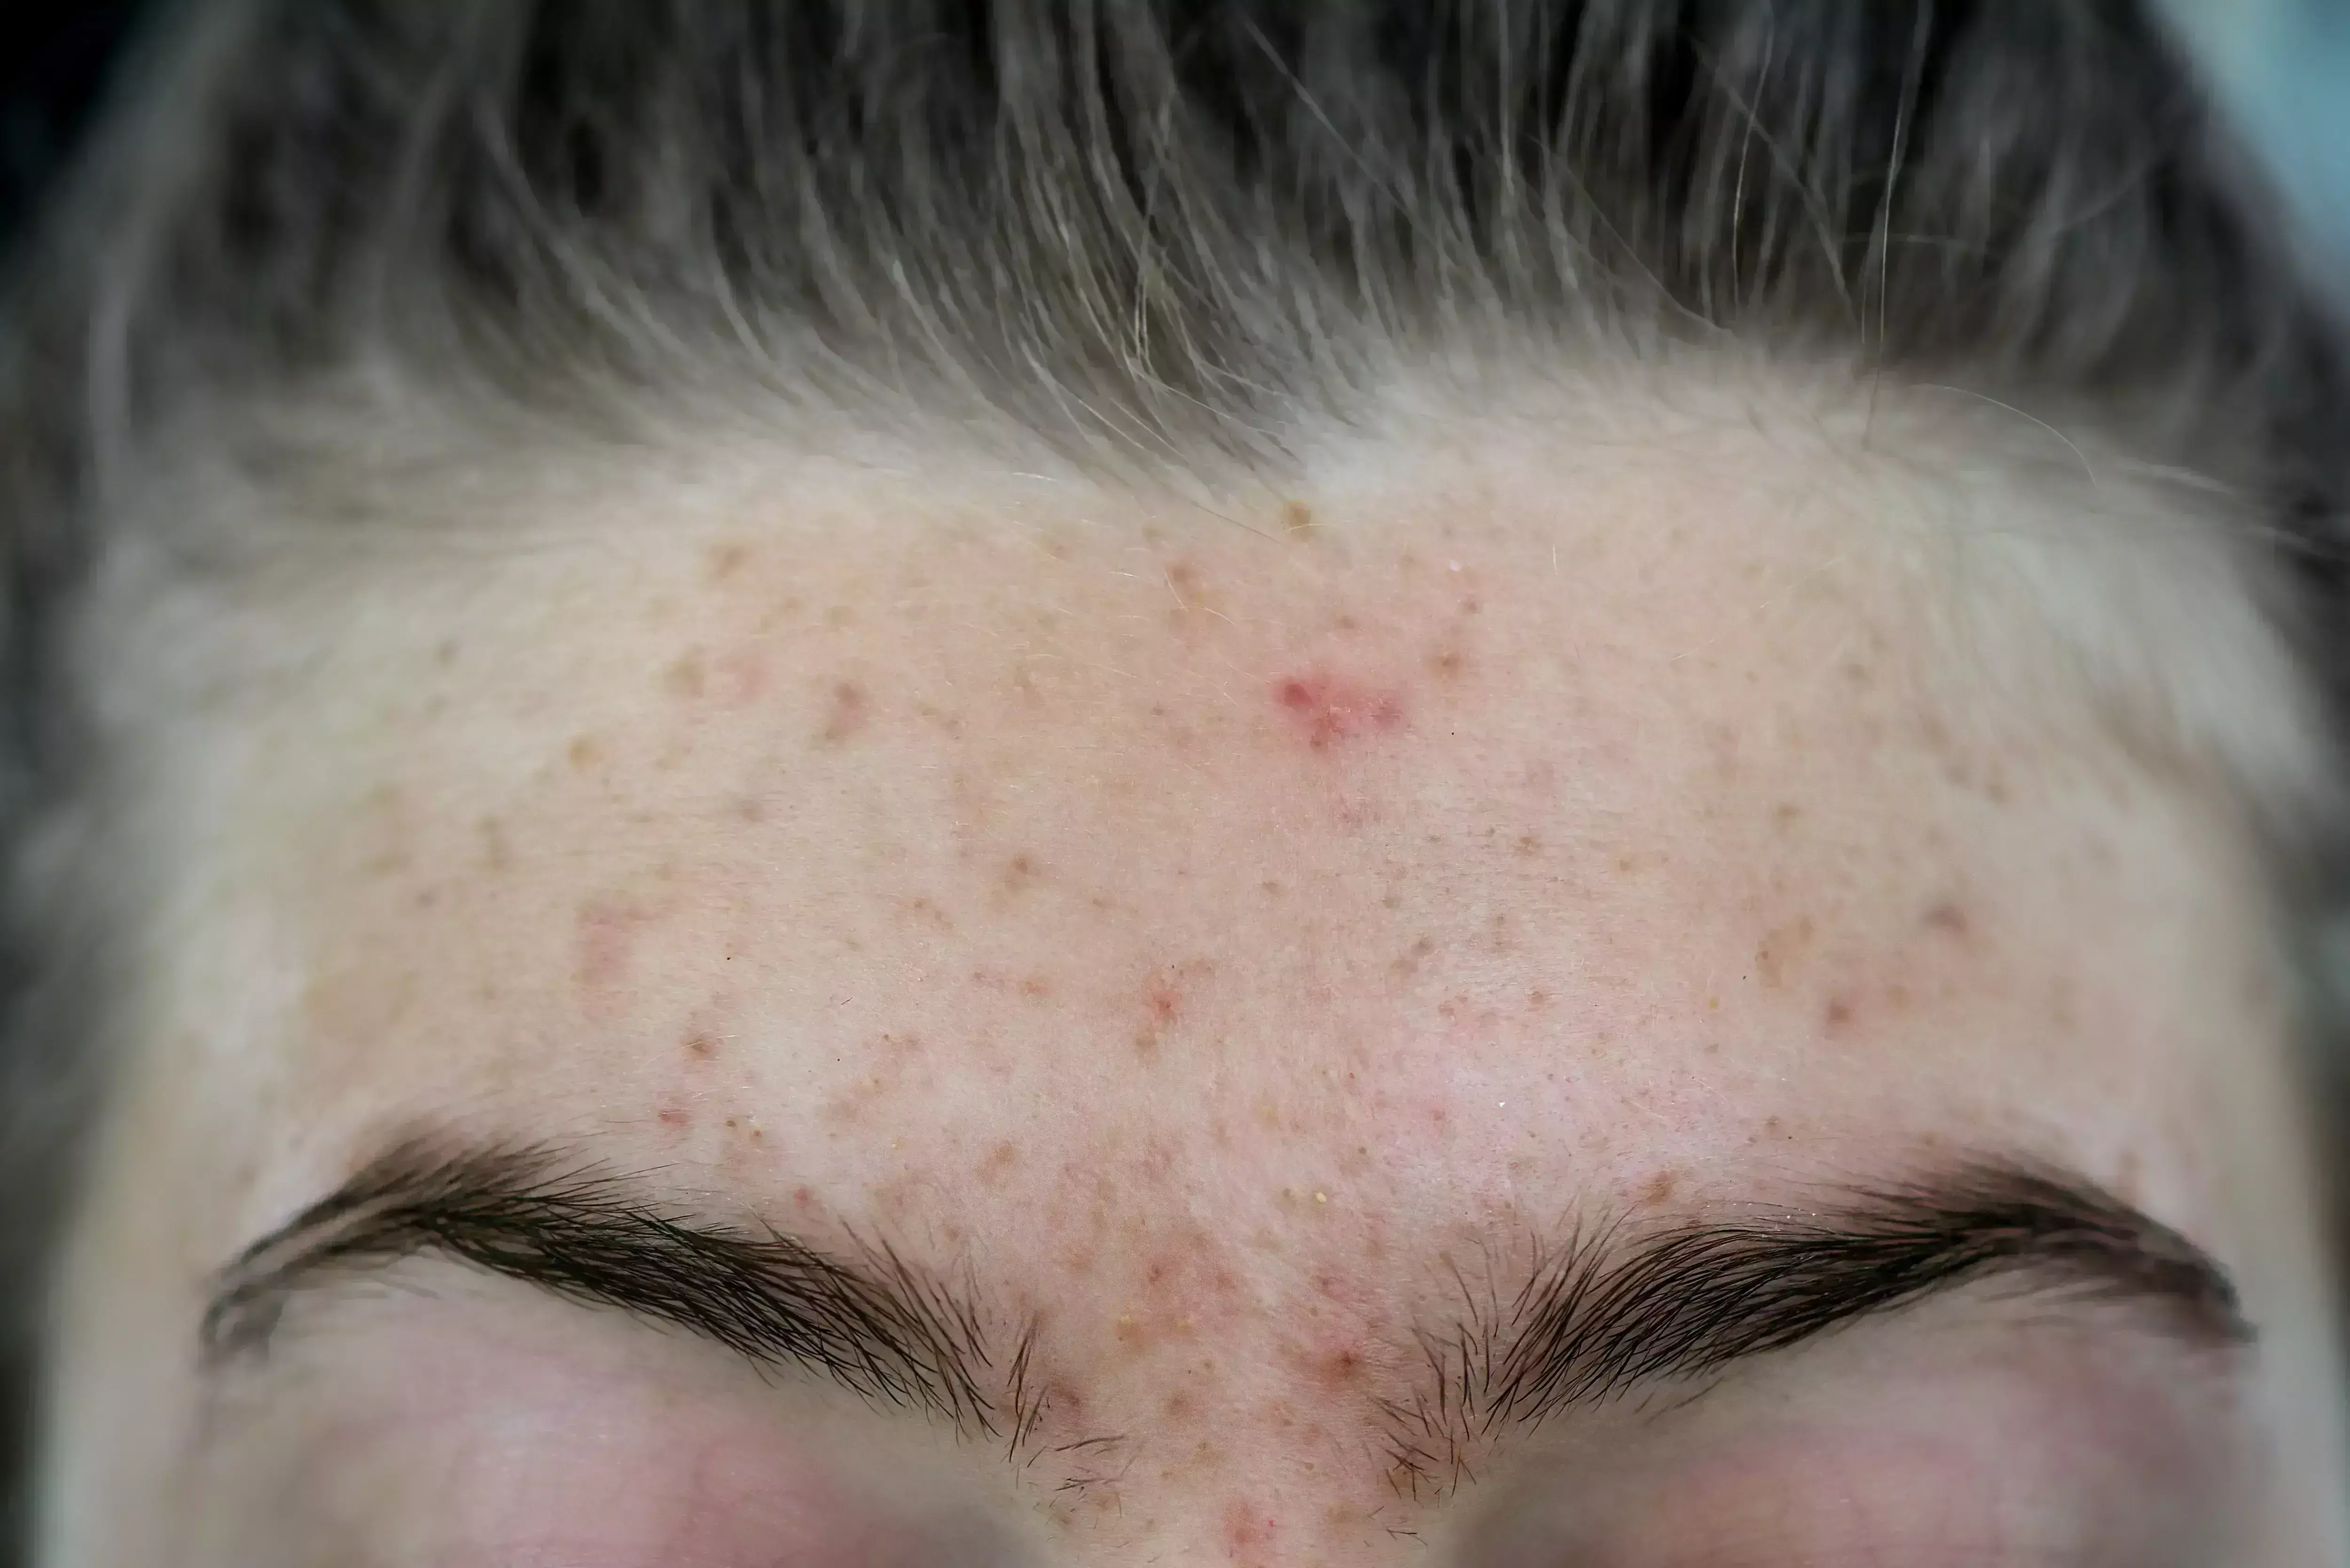 Tranexamic Acid Mesotherapy Effective for Post-Acne Erythema